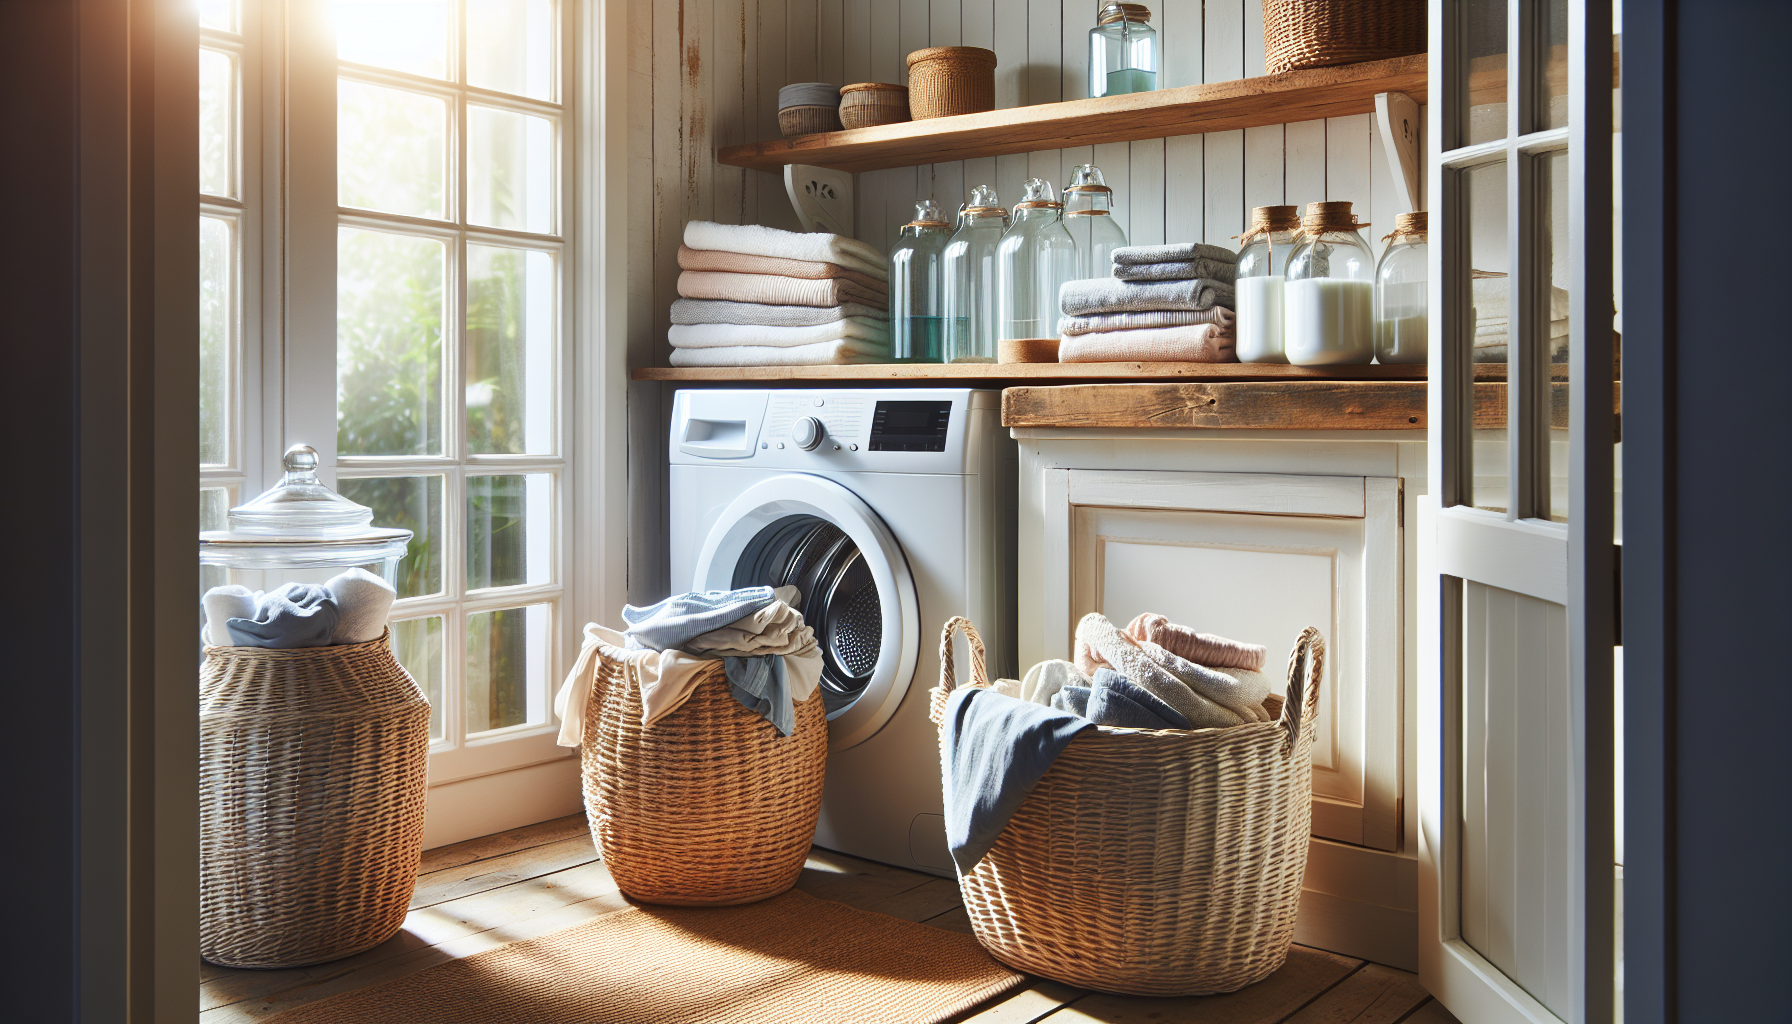 Stylish woven baskets and glass jars for laundry storage